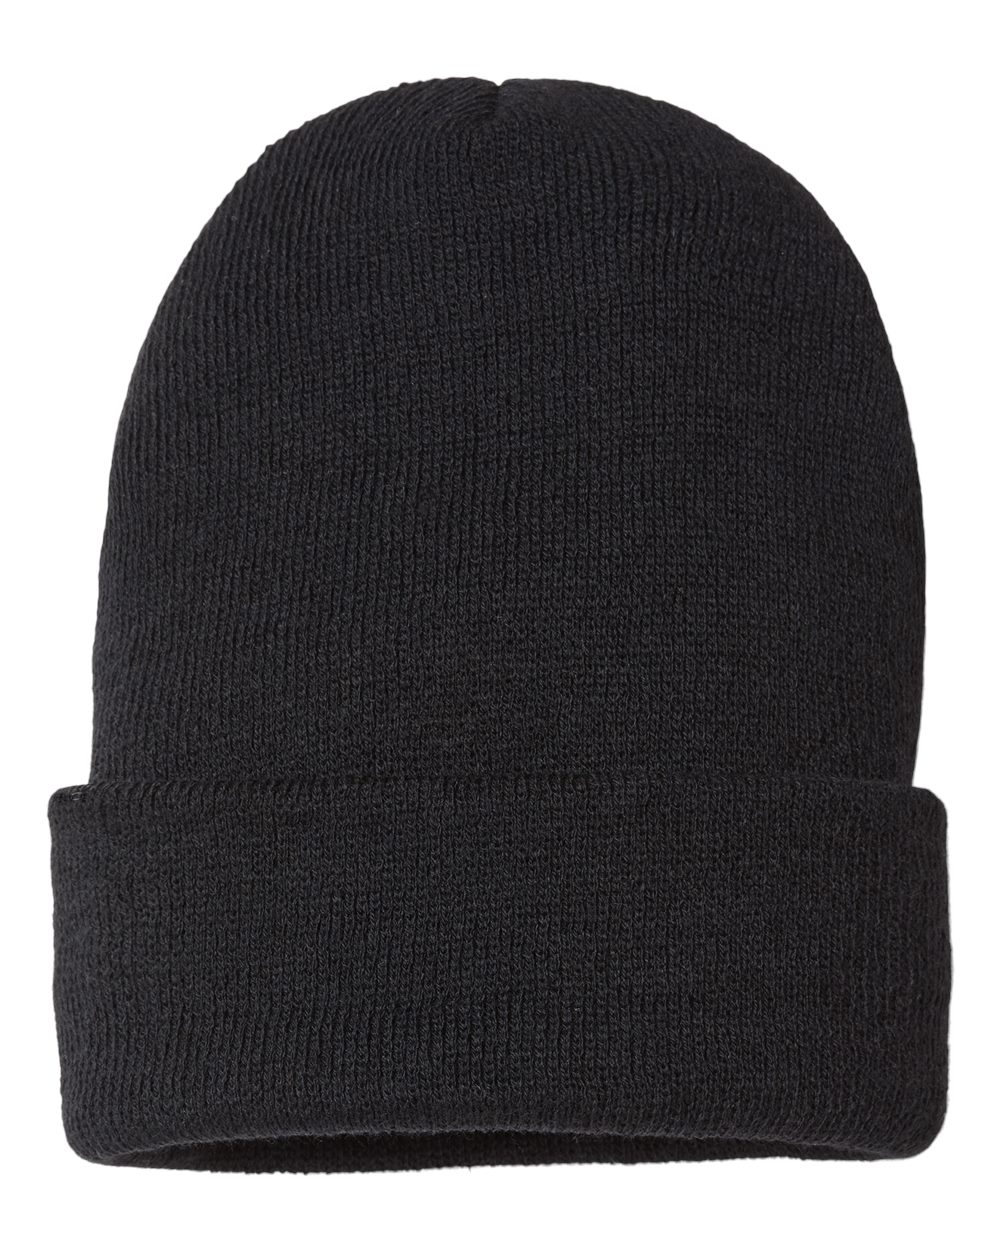 CAP AMERICA SKN24 - USA-Made Sustainable Cuff Knit Beanie